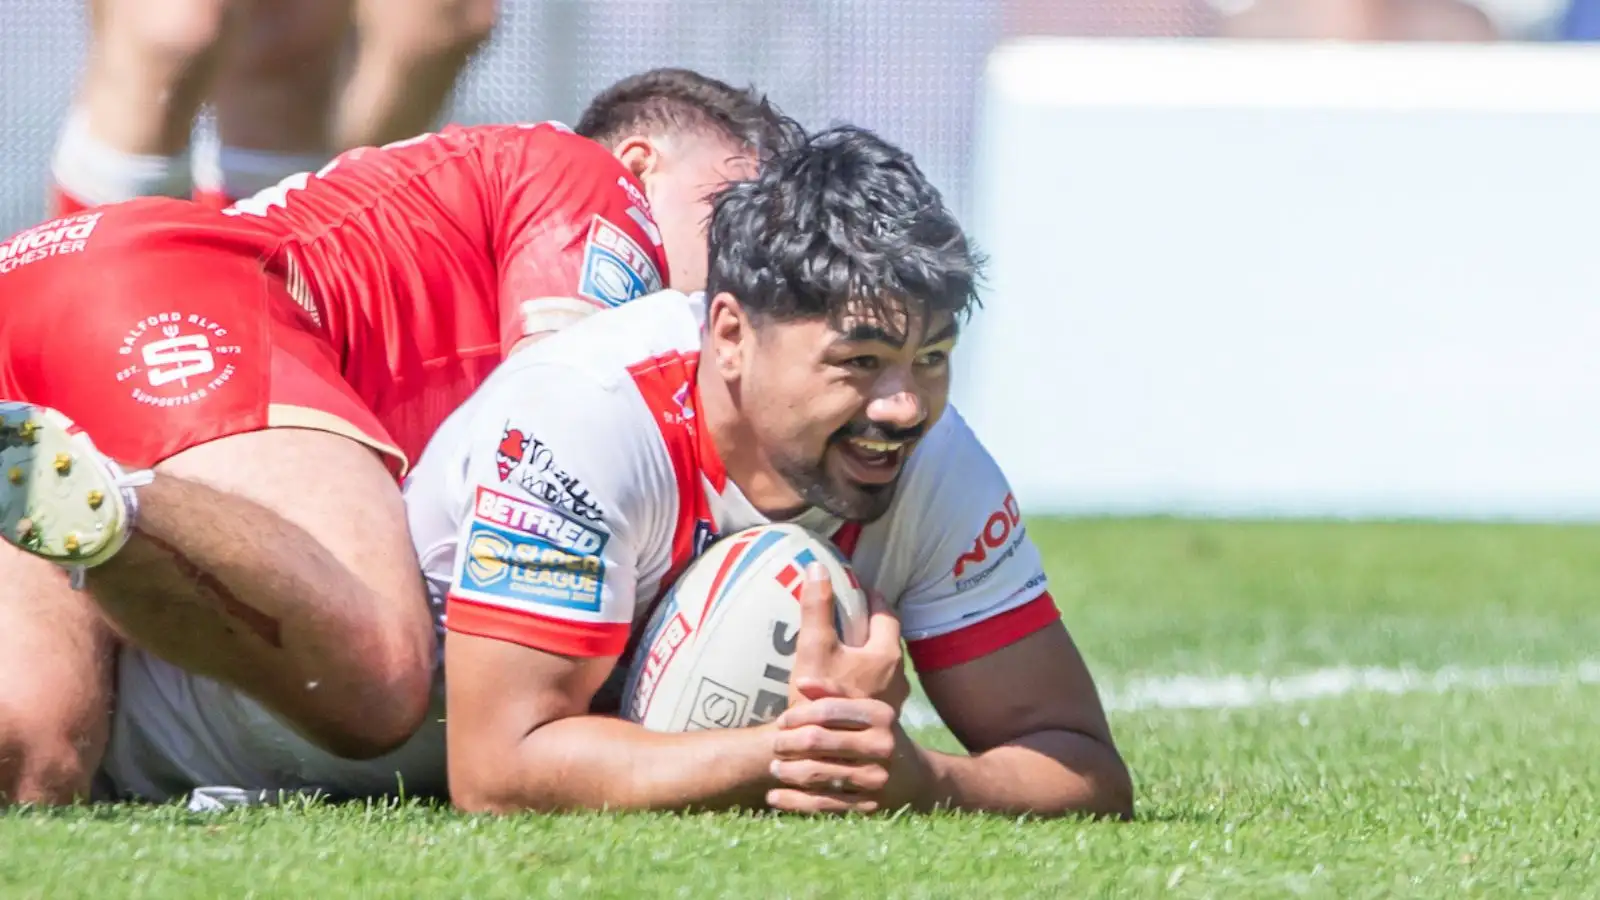 St Helens forward wants to make it ‘five in a row’ after signing new deal